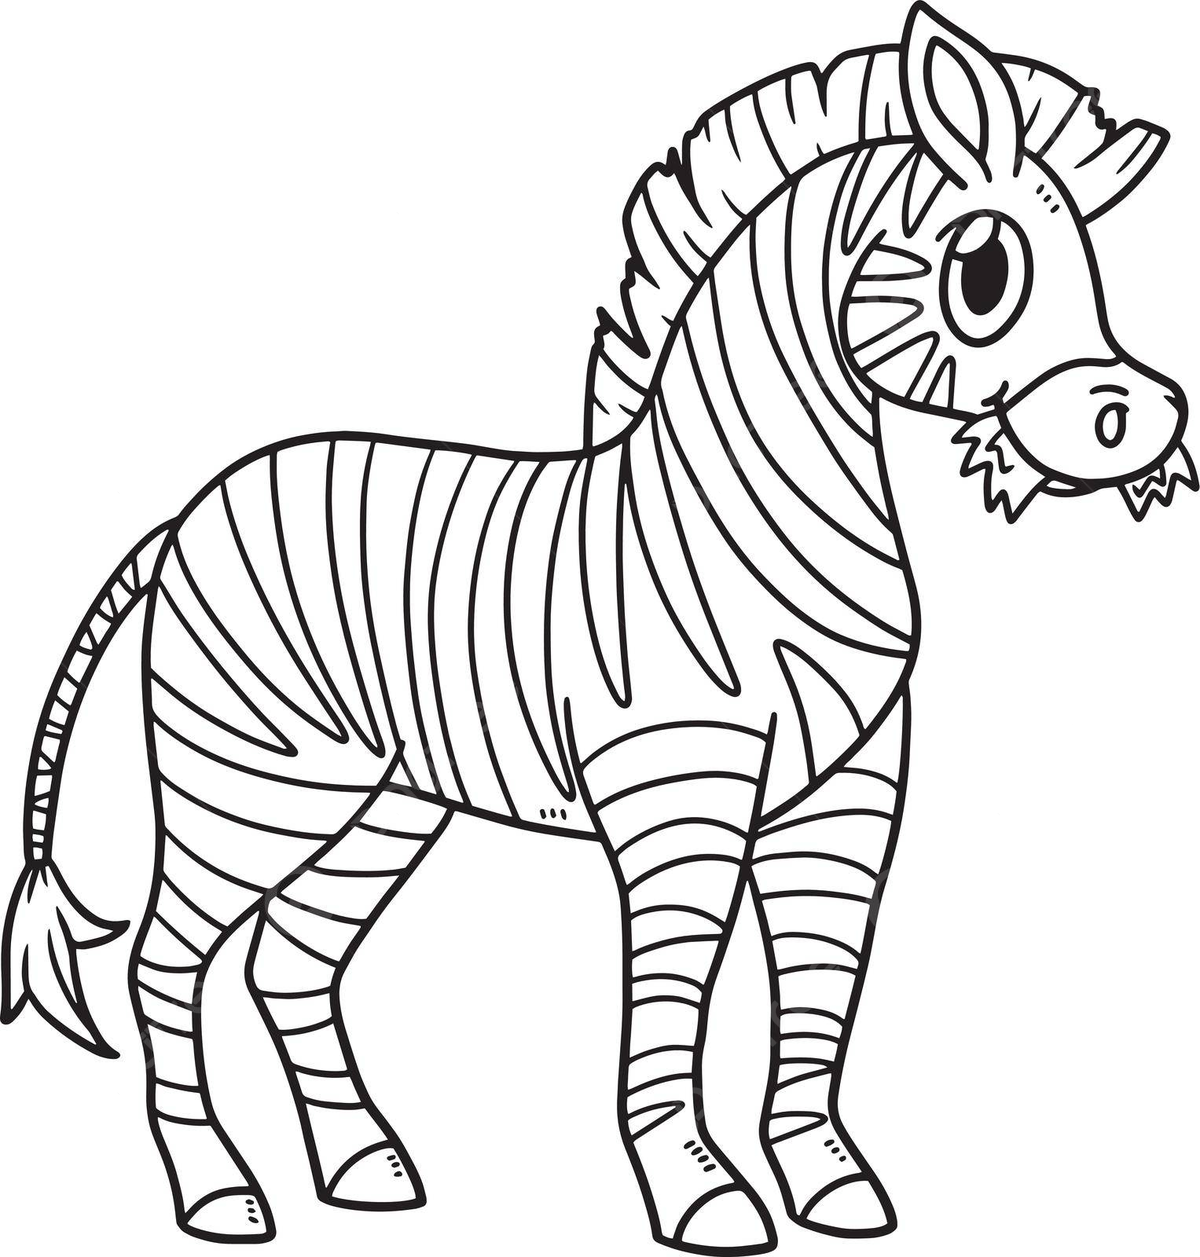 Colouring pages clipart images free download png transparent background